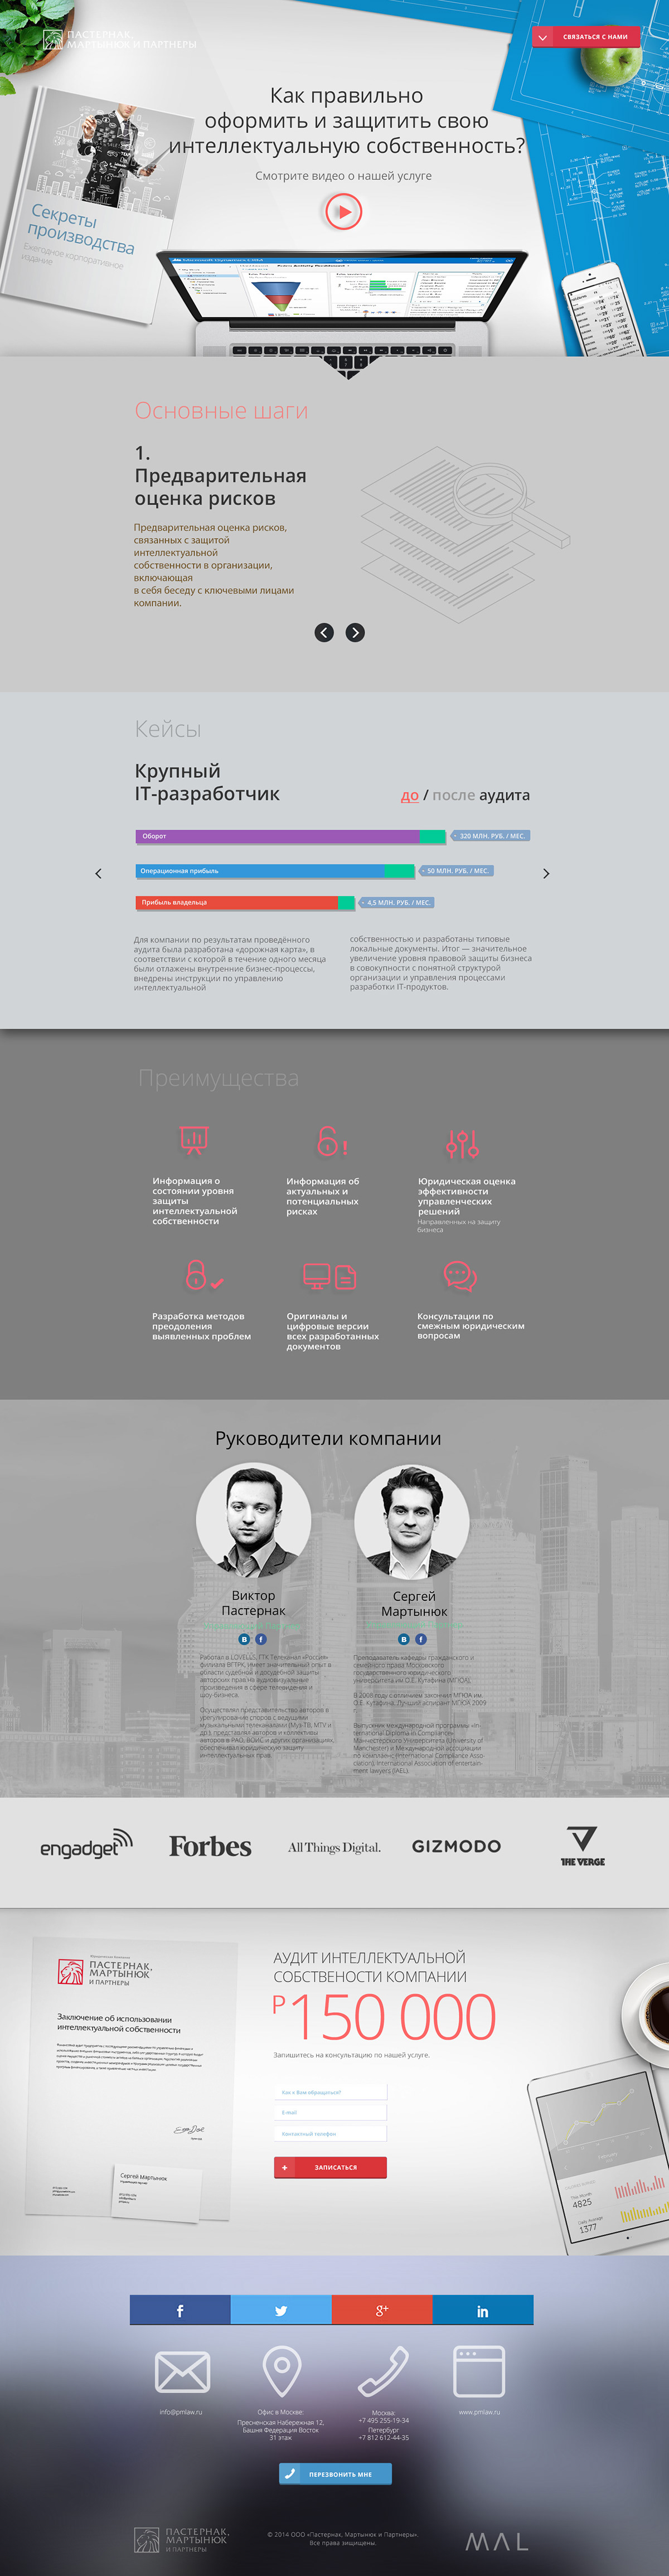 2014th page-proofs landing page Saling page Responsive web design Grunt.js